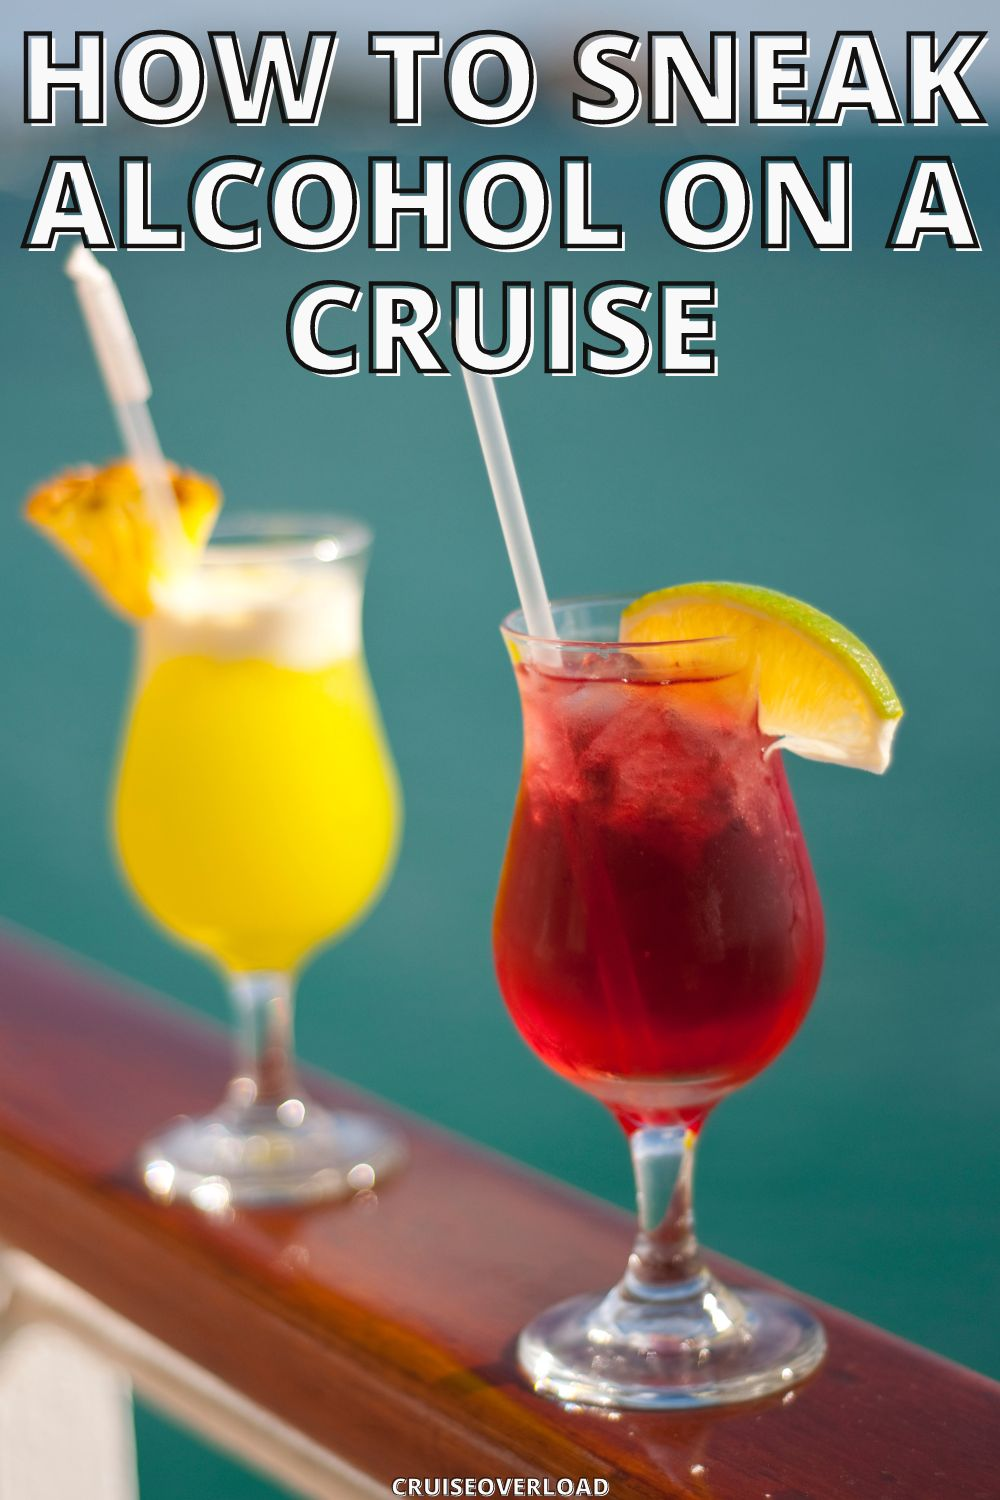 How To Sneak Alcohol On A Cruise Cruise Overload